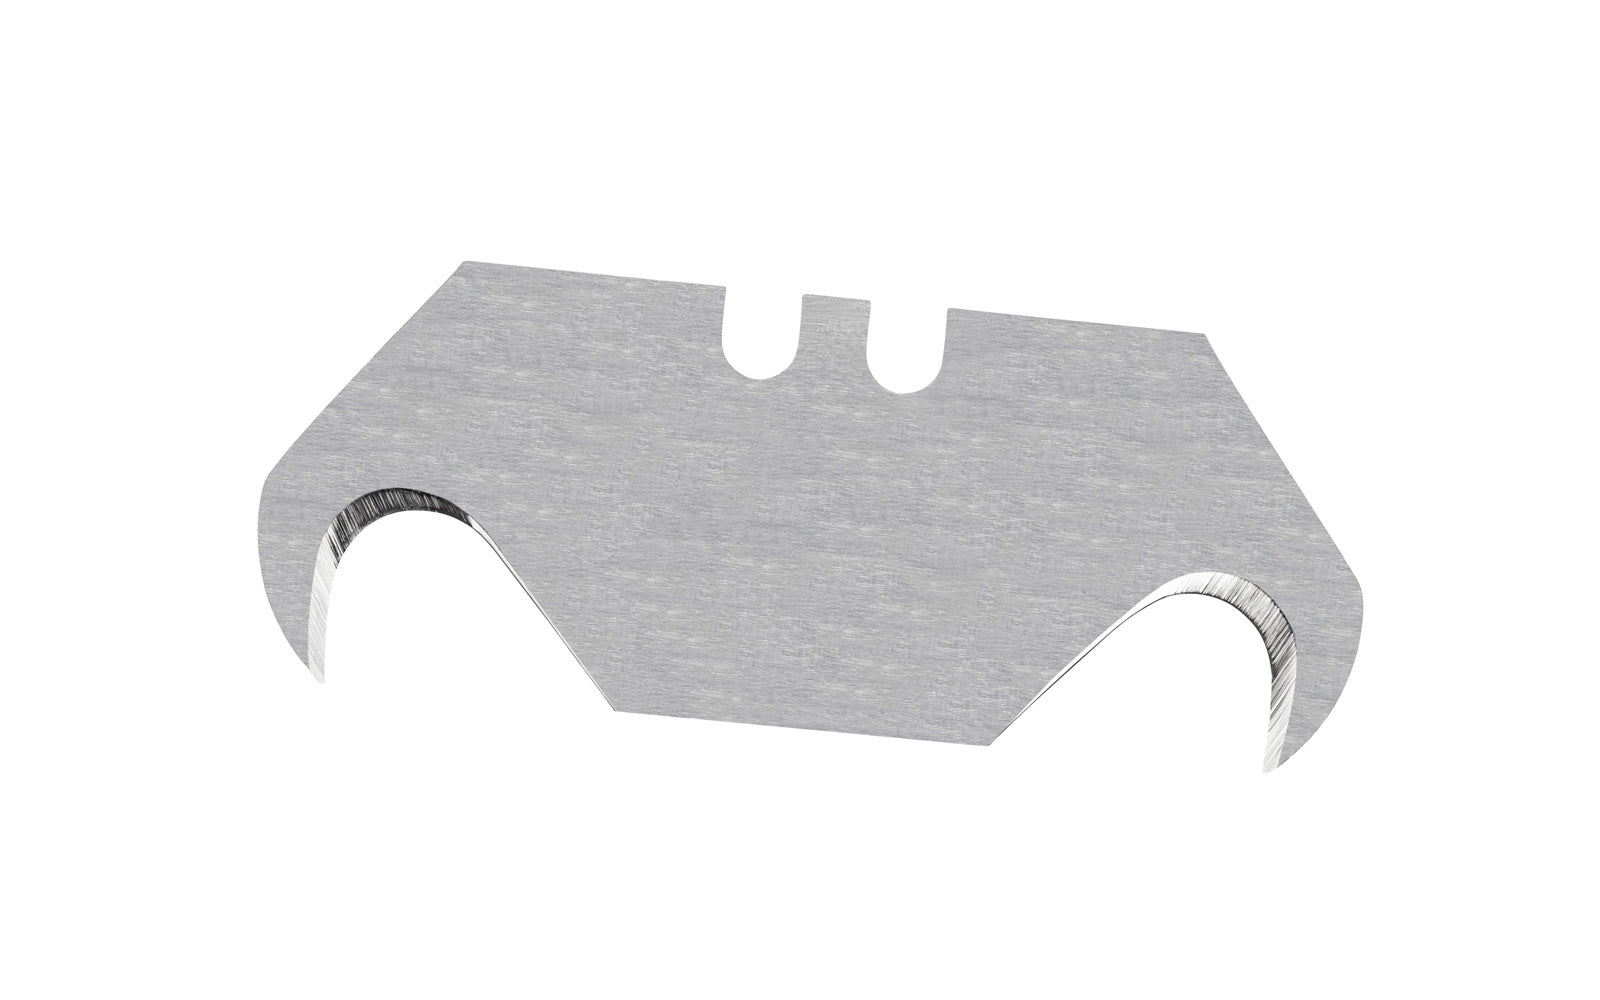 These Hook Utility Blades are made of high quality carbon steel & hold a sharp edge. Designed for linoleum, vinyl, canvas, rugs, screens, roofing materials, etc. 0.25" thickness of blade. Universal two-notch design & fits most standard utility knives. 5 Pack. PHC - Pacific Handy Cutter.  Made in England. 073441000830